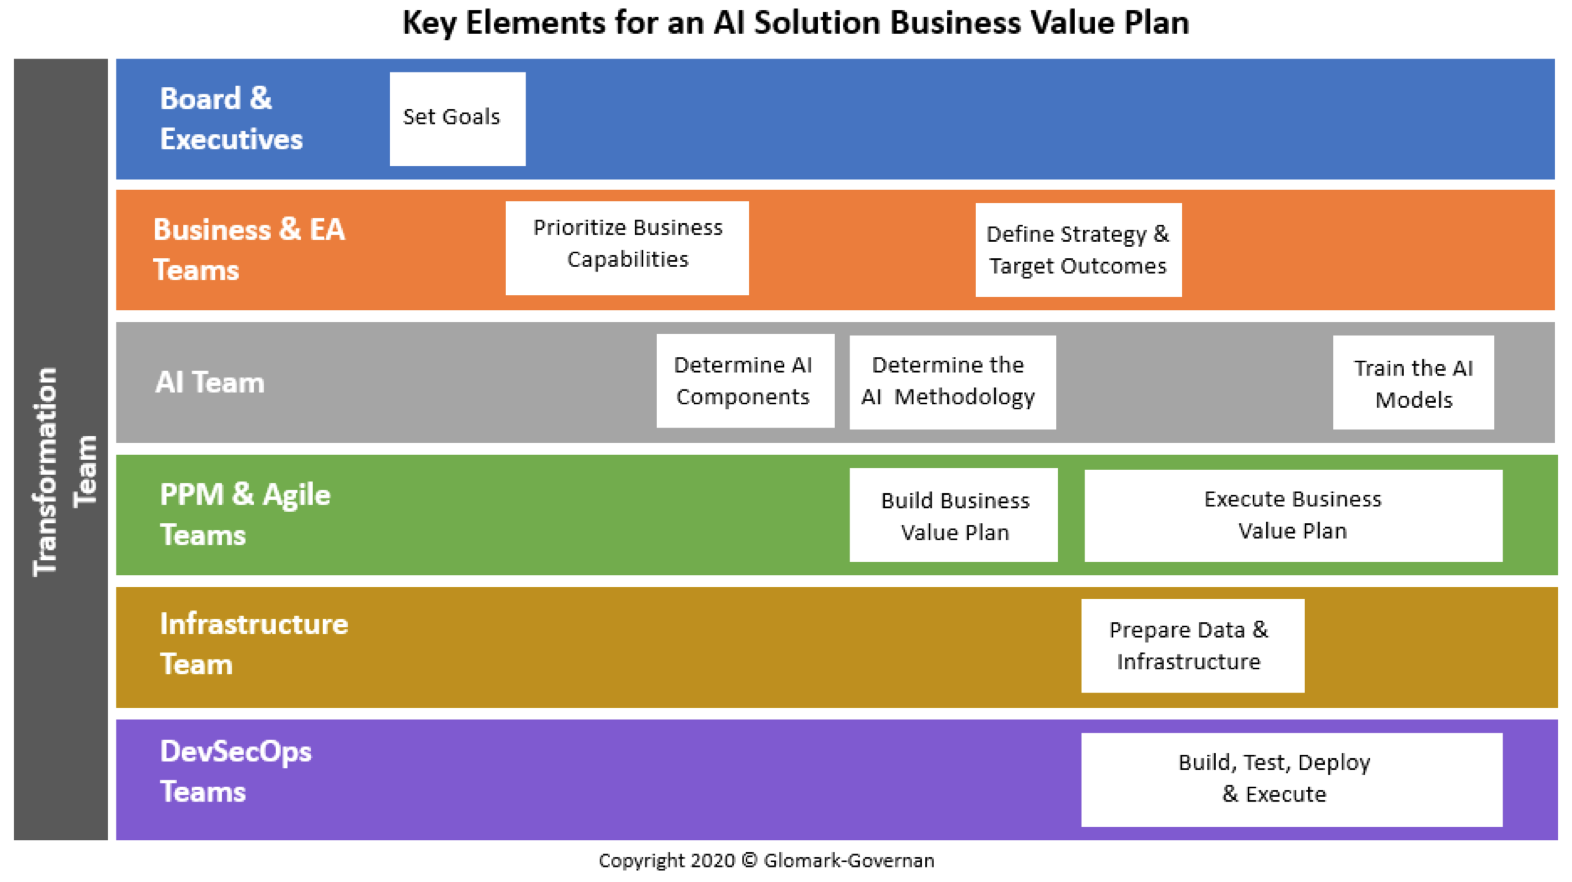 Key elements for an AI business solution value plan